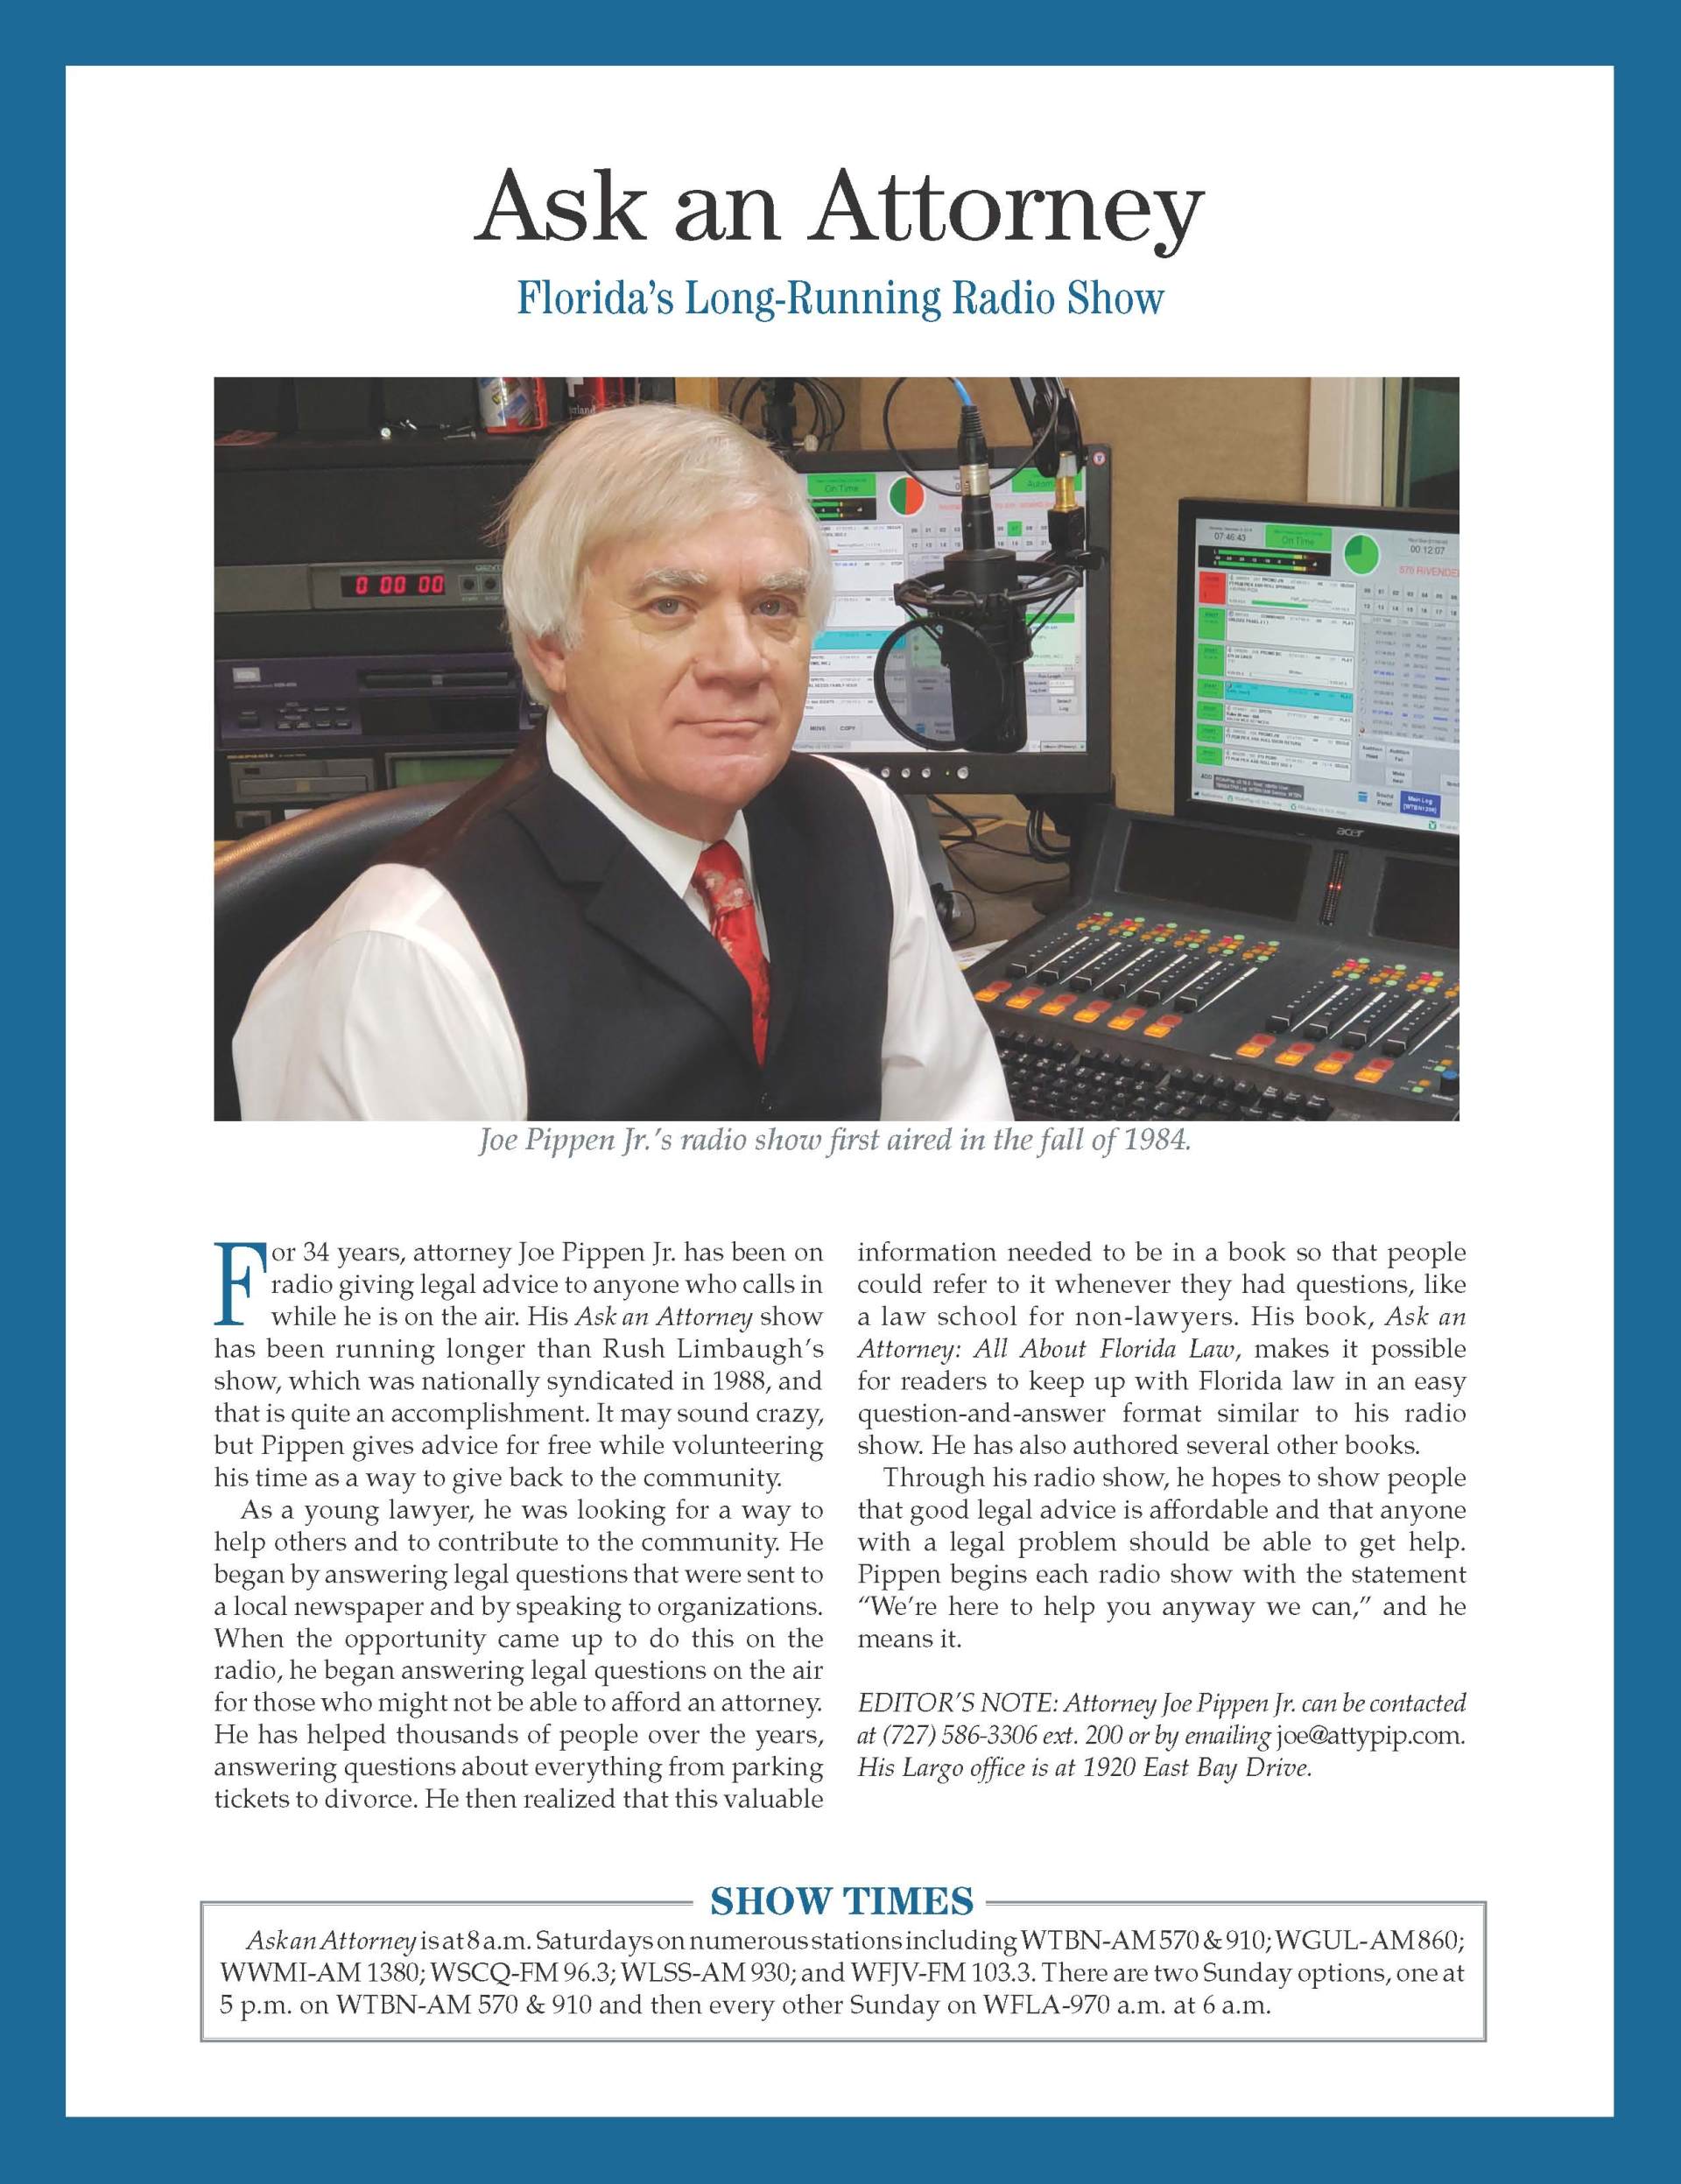 Ask an Attorney Florida's Longest Running Radio Show